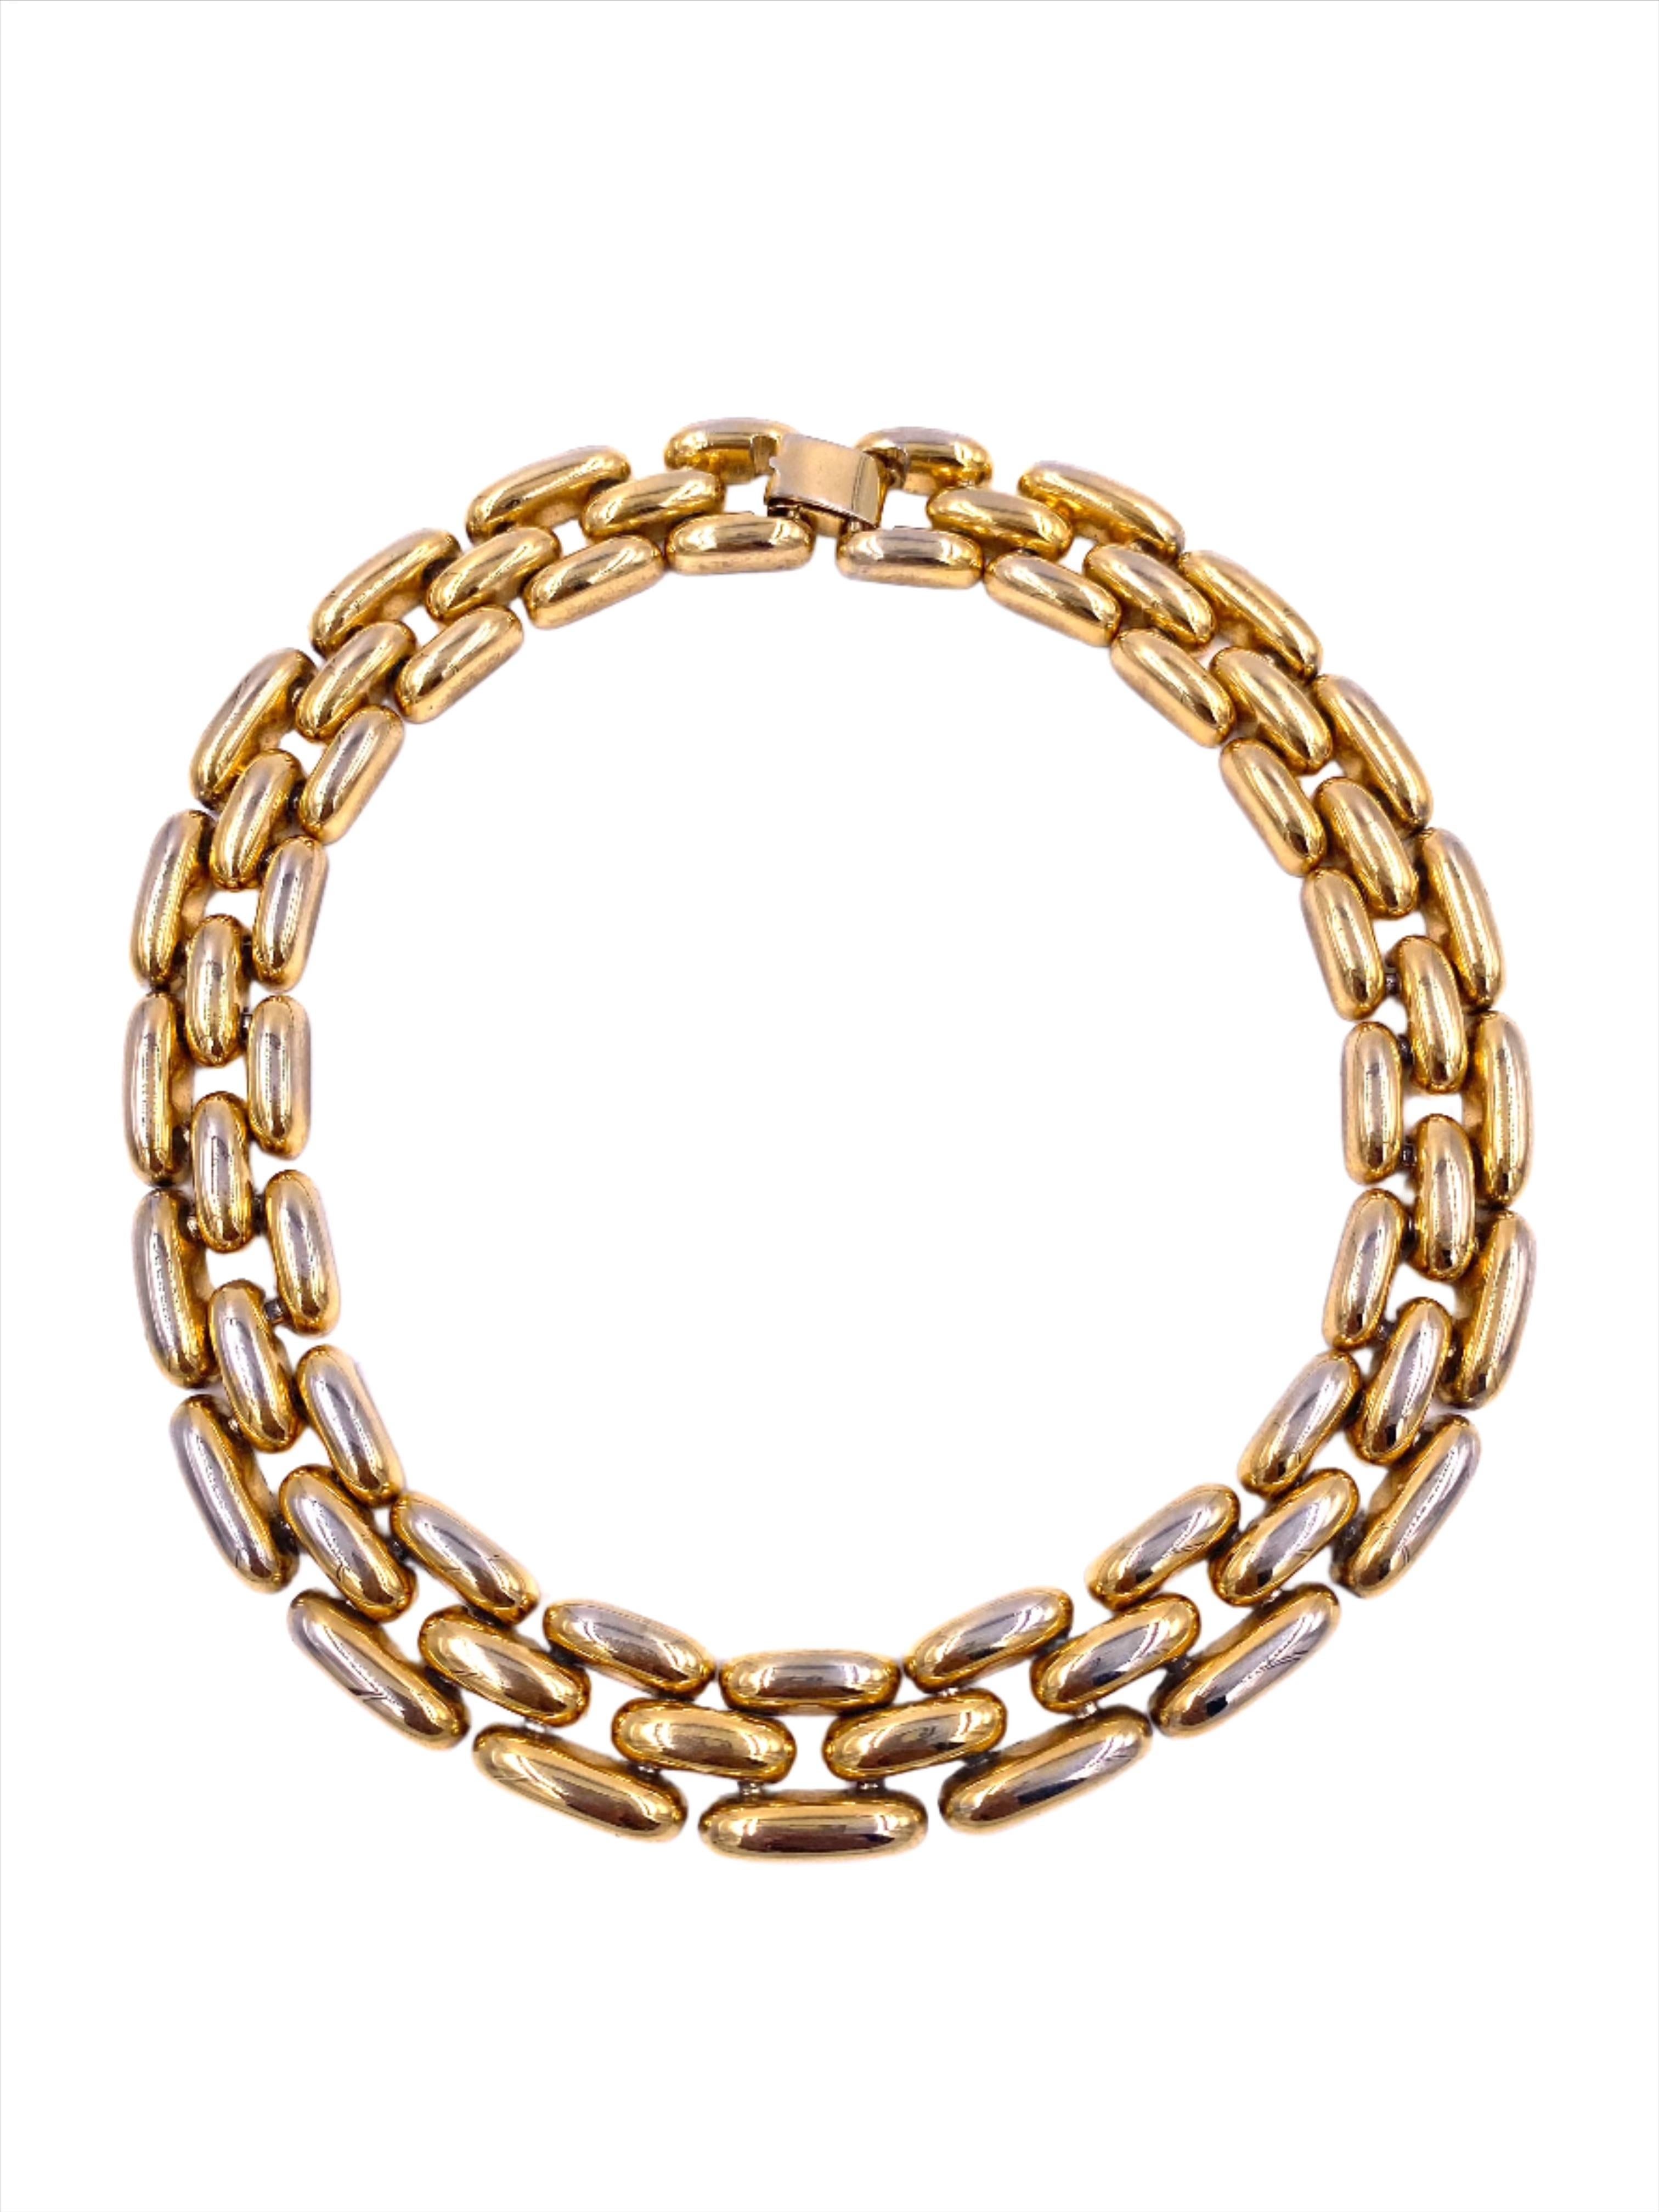 Indulge in luxury with our captivating Gold Necklace. Crafted with linked pieces, this necklace is 1